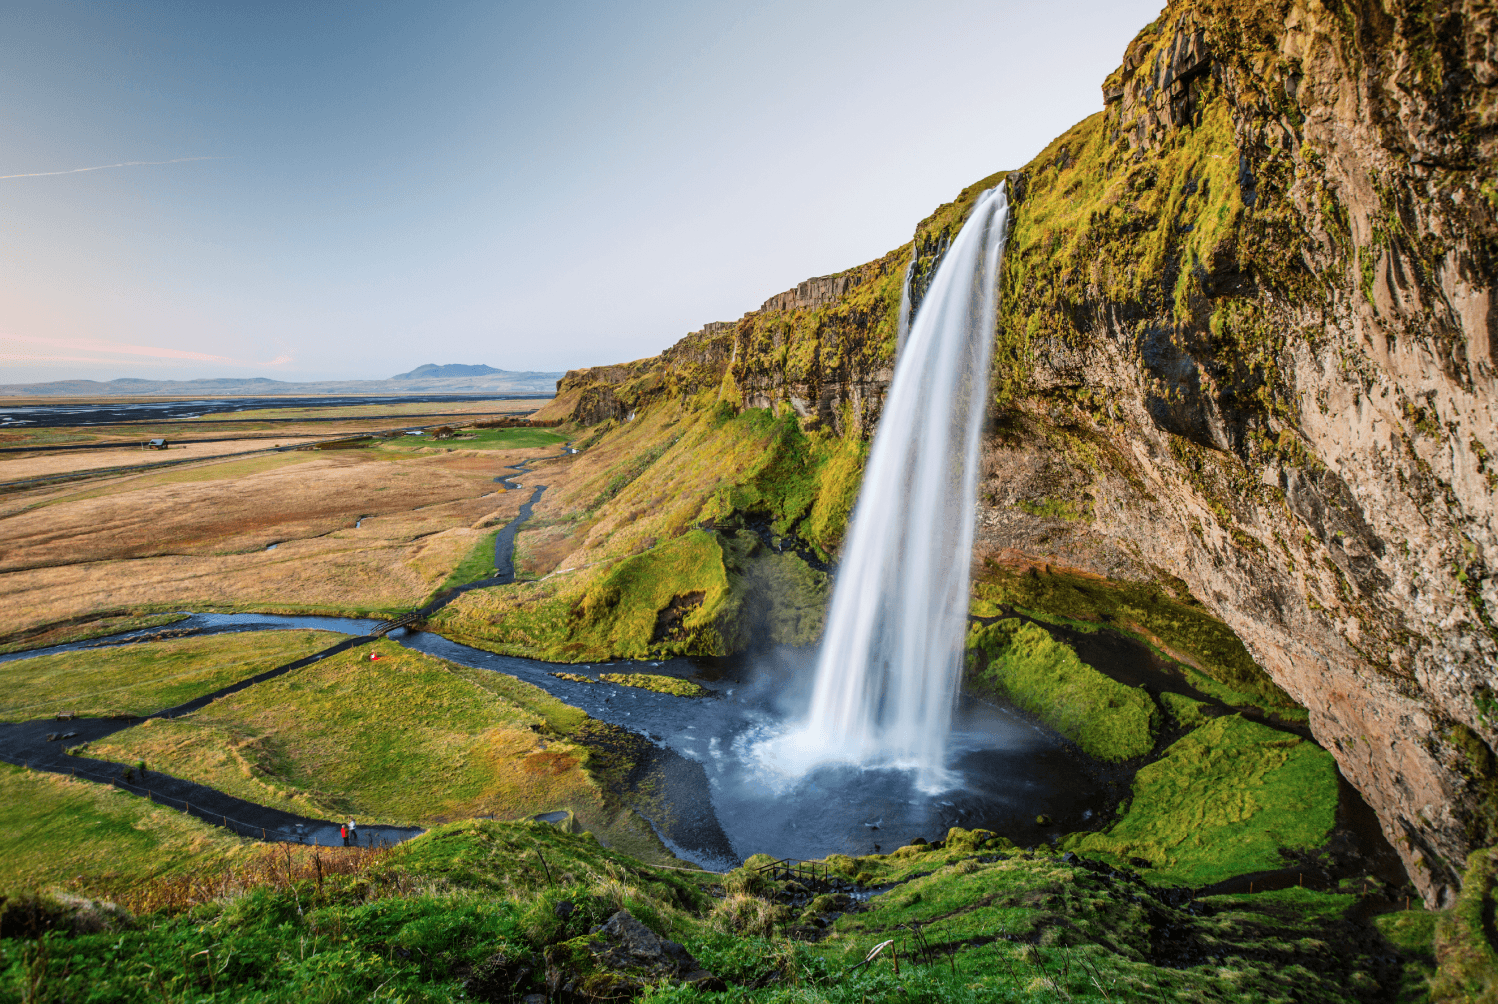 Norwegian Fjords cruise and Iceland aboard Ponant's Le Soléal